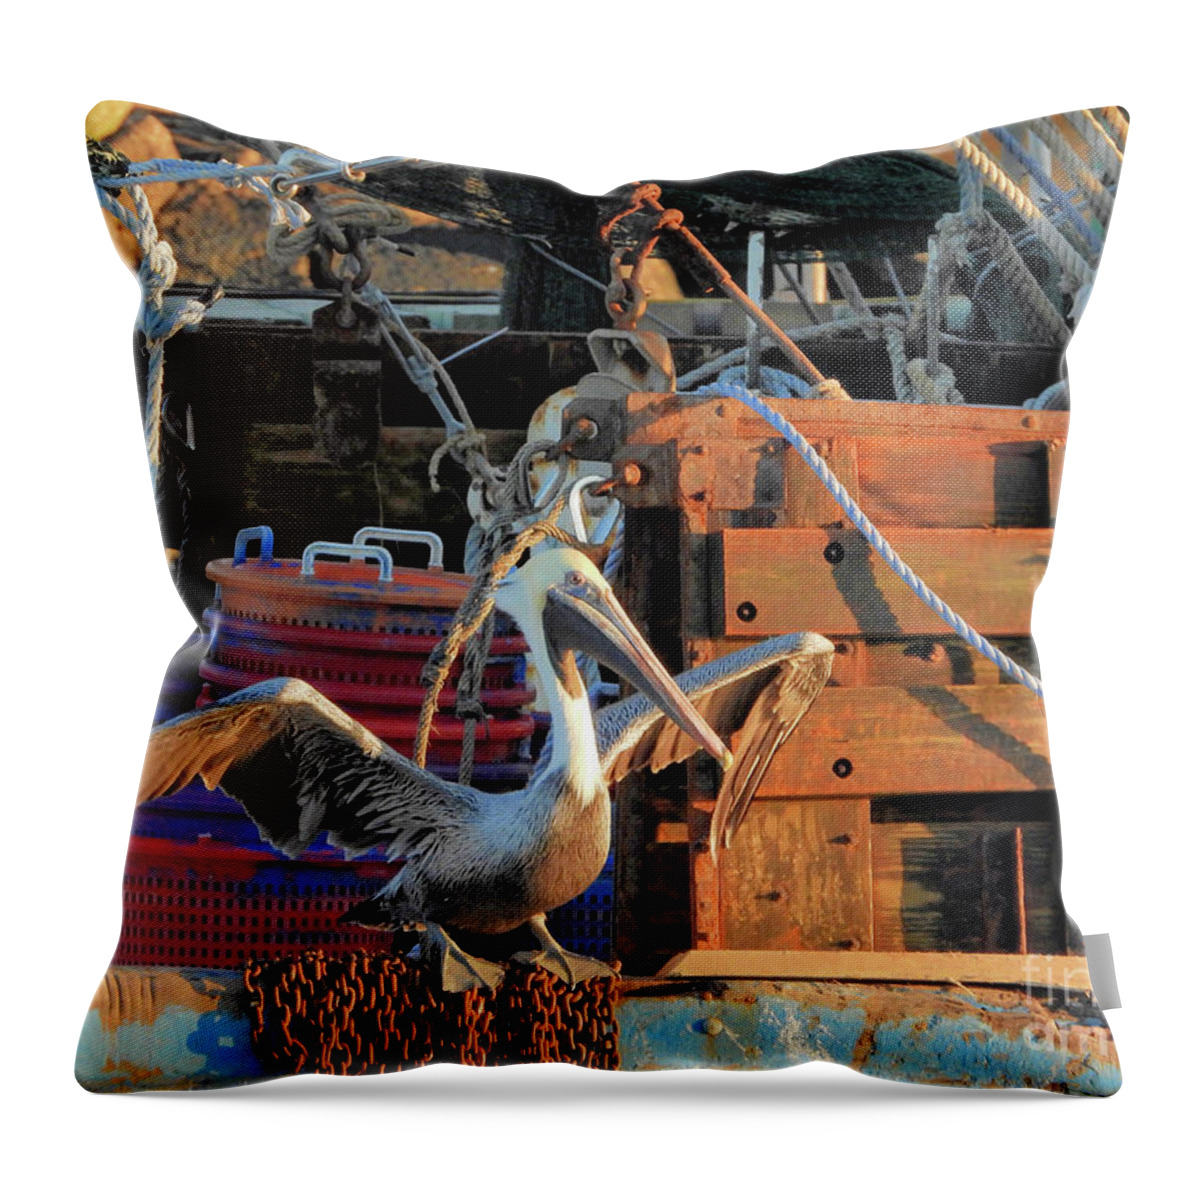 Pelicans Throw Pillow featuring the photograph Shem Creek Pelican by Scott Cameron